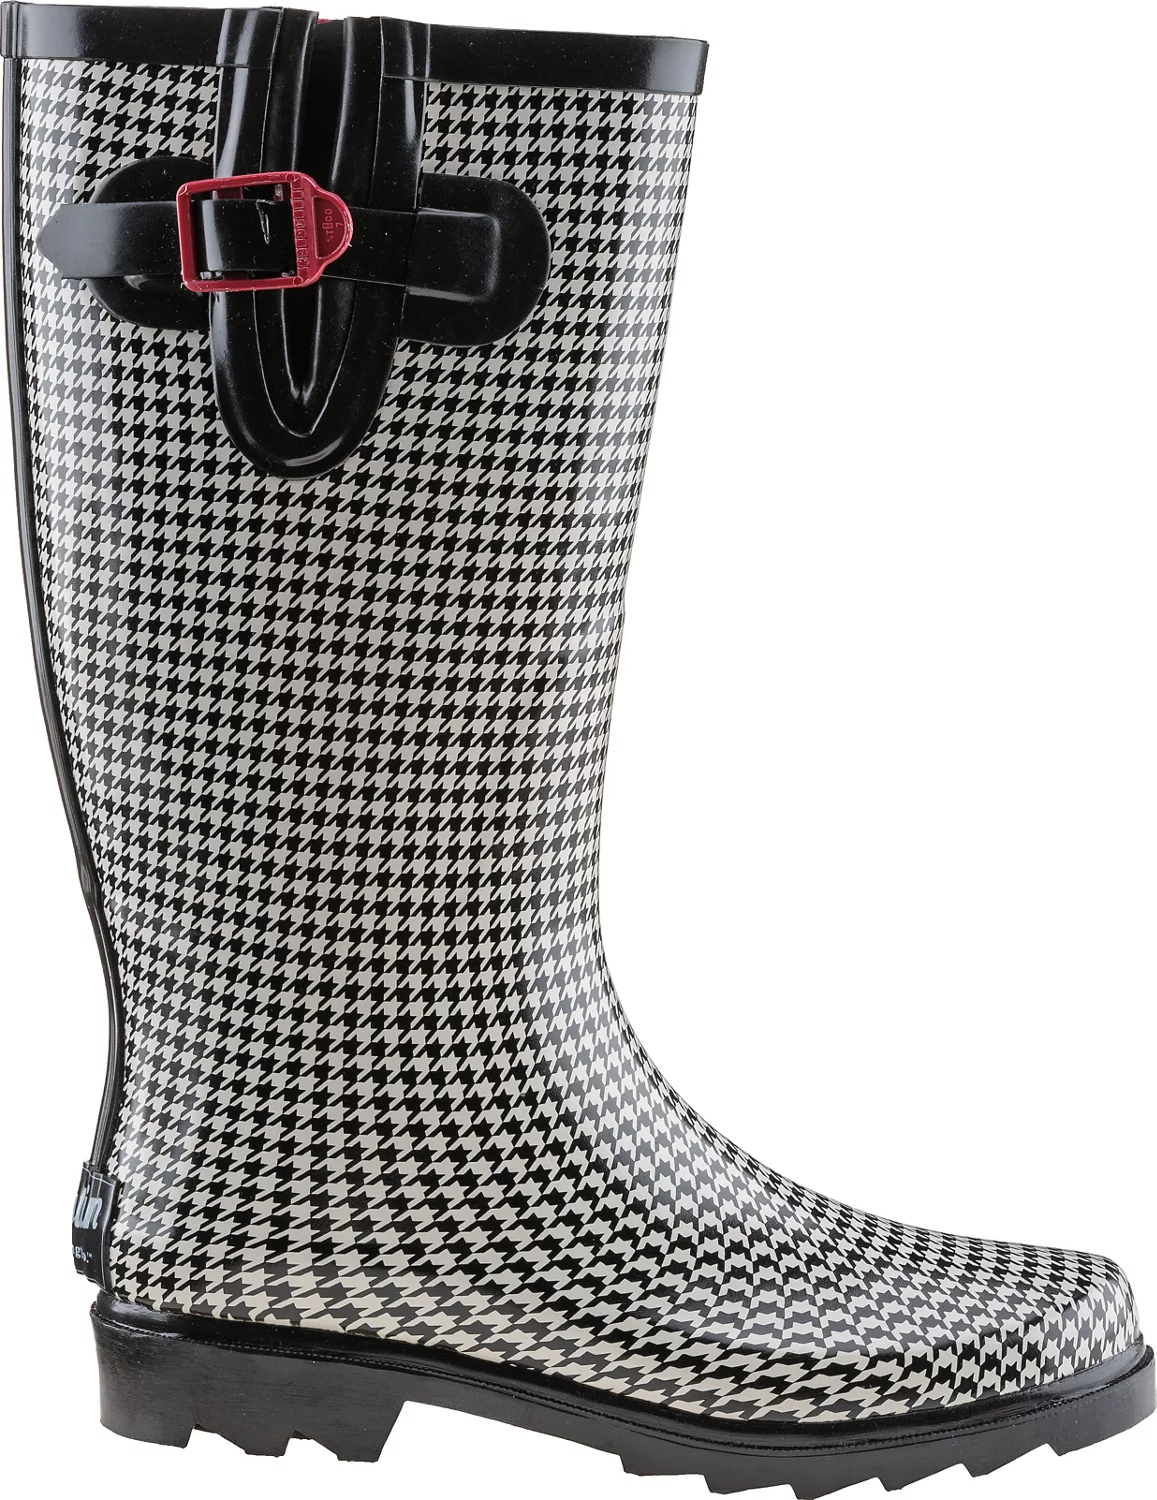 Women's Boots | Boots For Women, Ladies' Boots | Academy